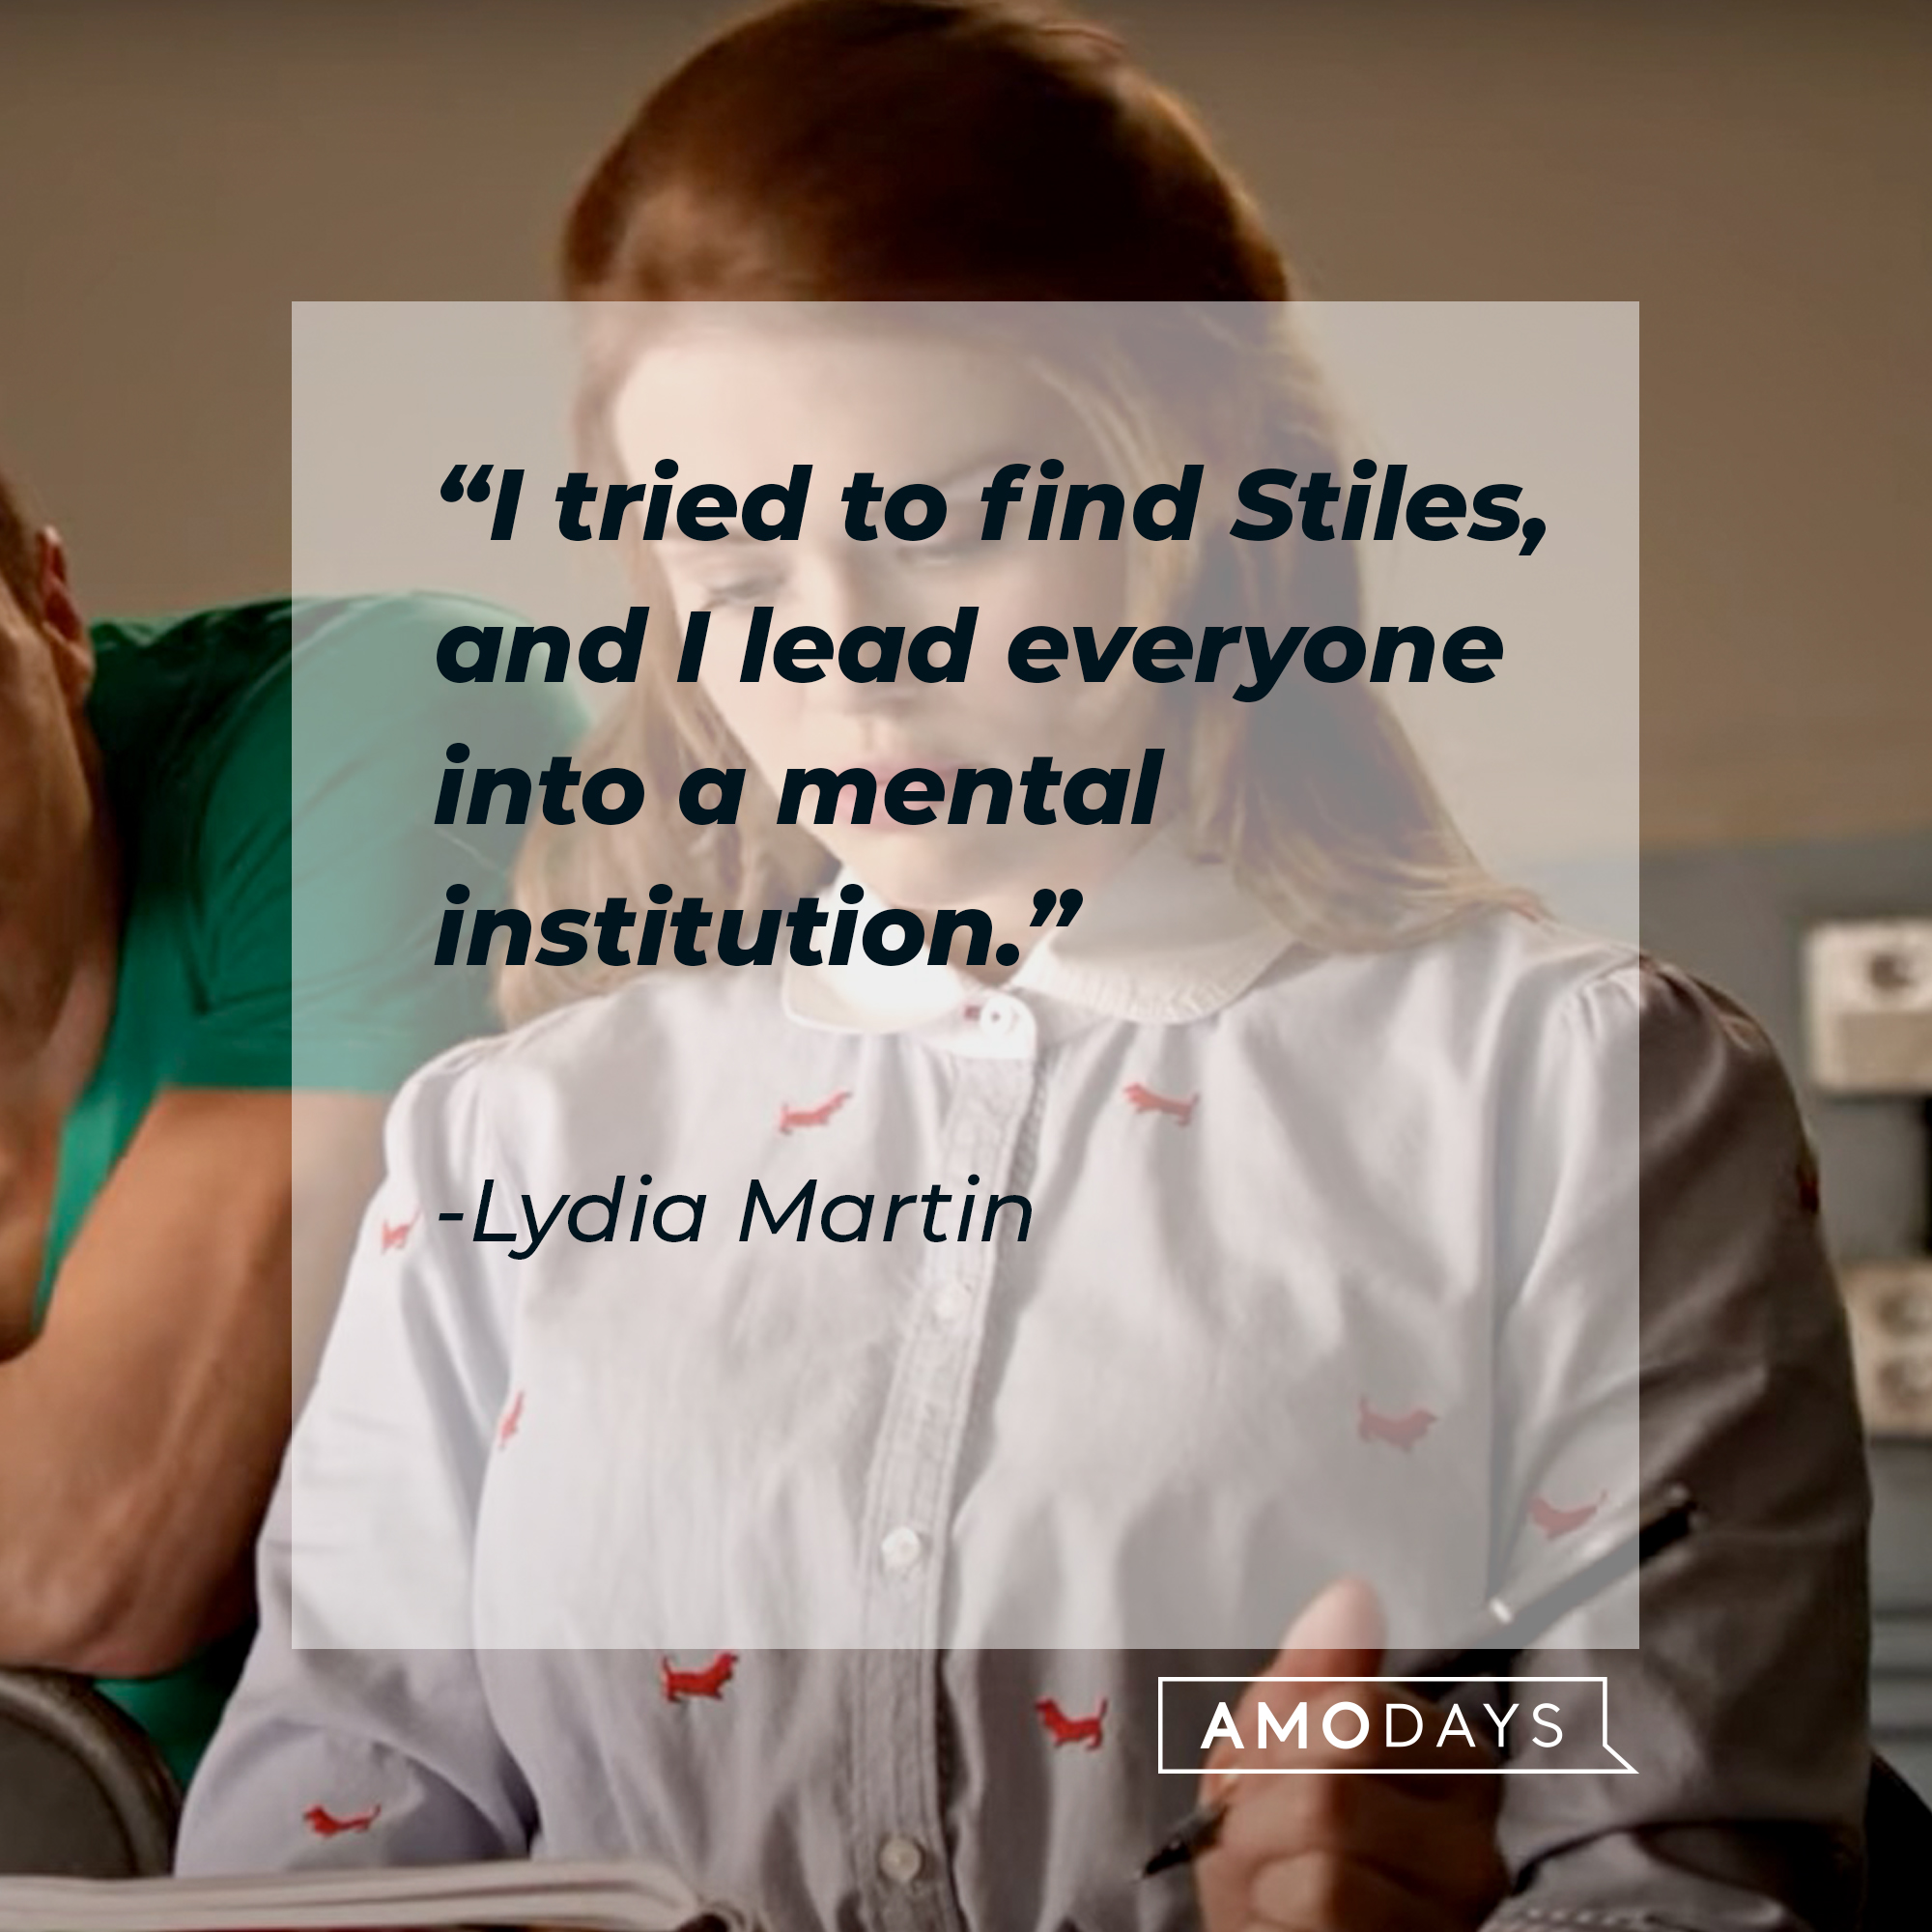 Lydia Martin with her quote: “I tried to find Stiles, and I lead everyone into a mental institution.” | Source: facebook.com/TeenWolf